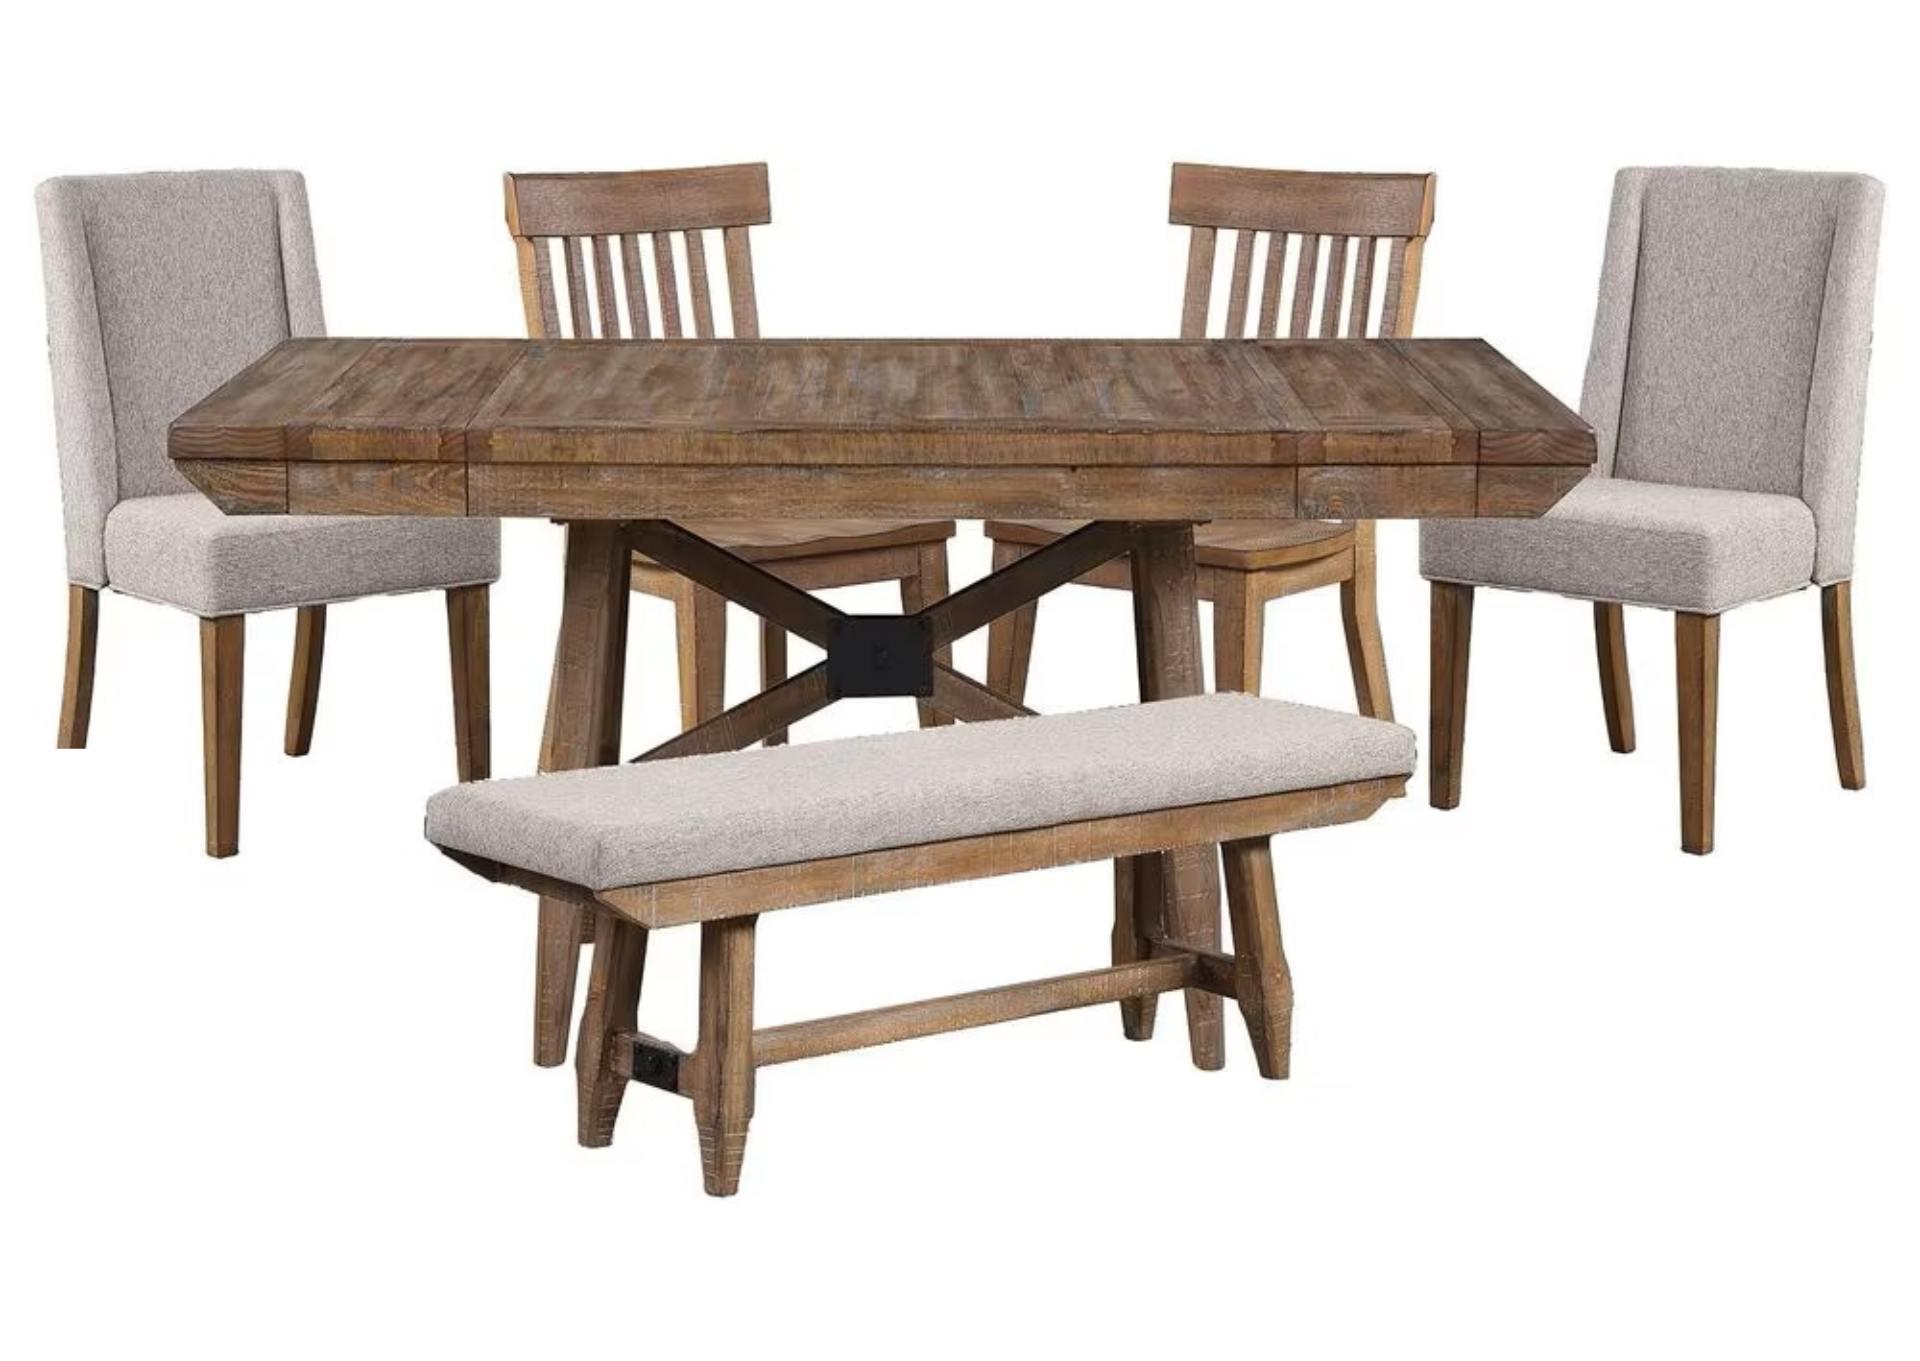 RIVERDALE 6 PIECE DINING TABLE SET